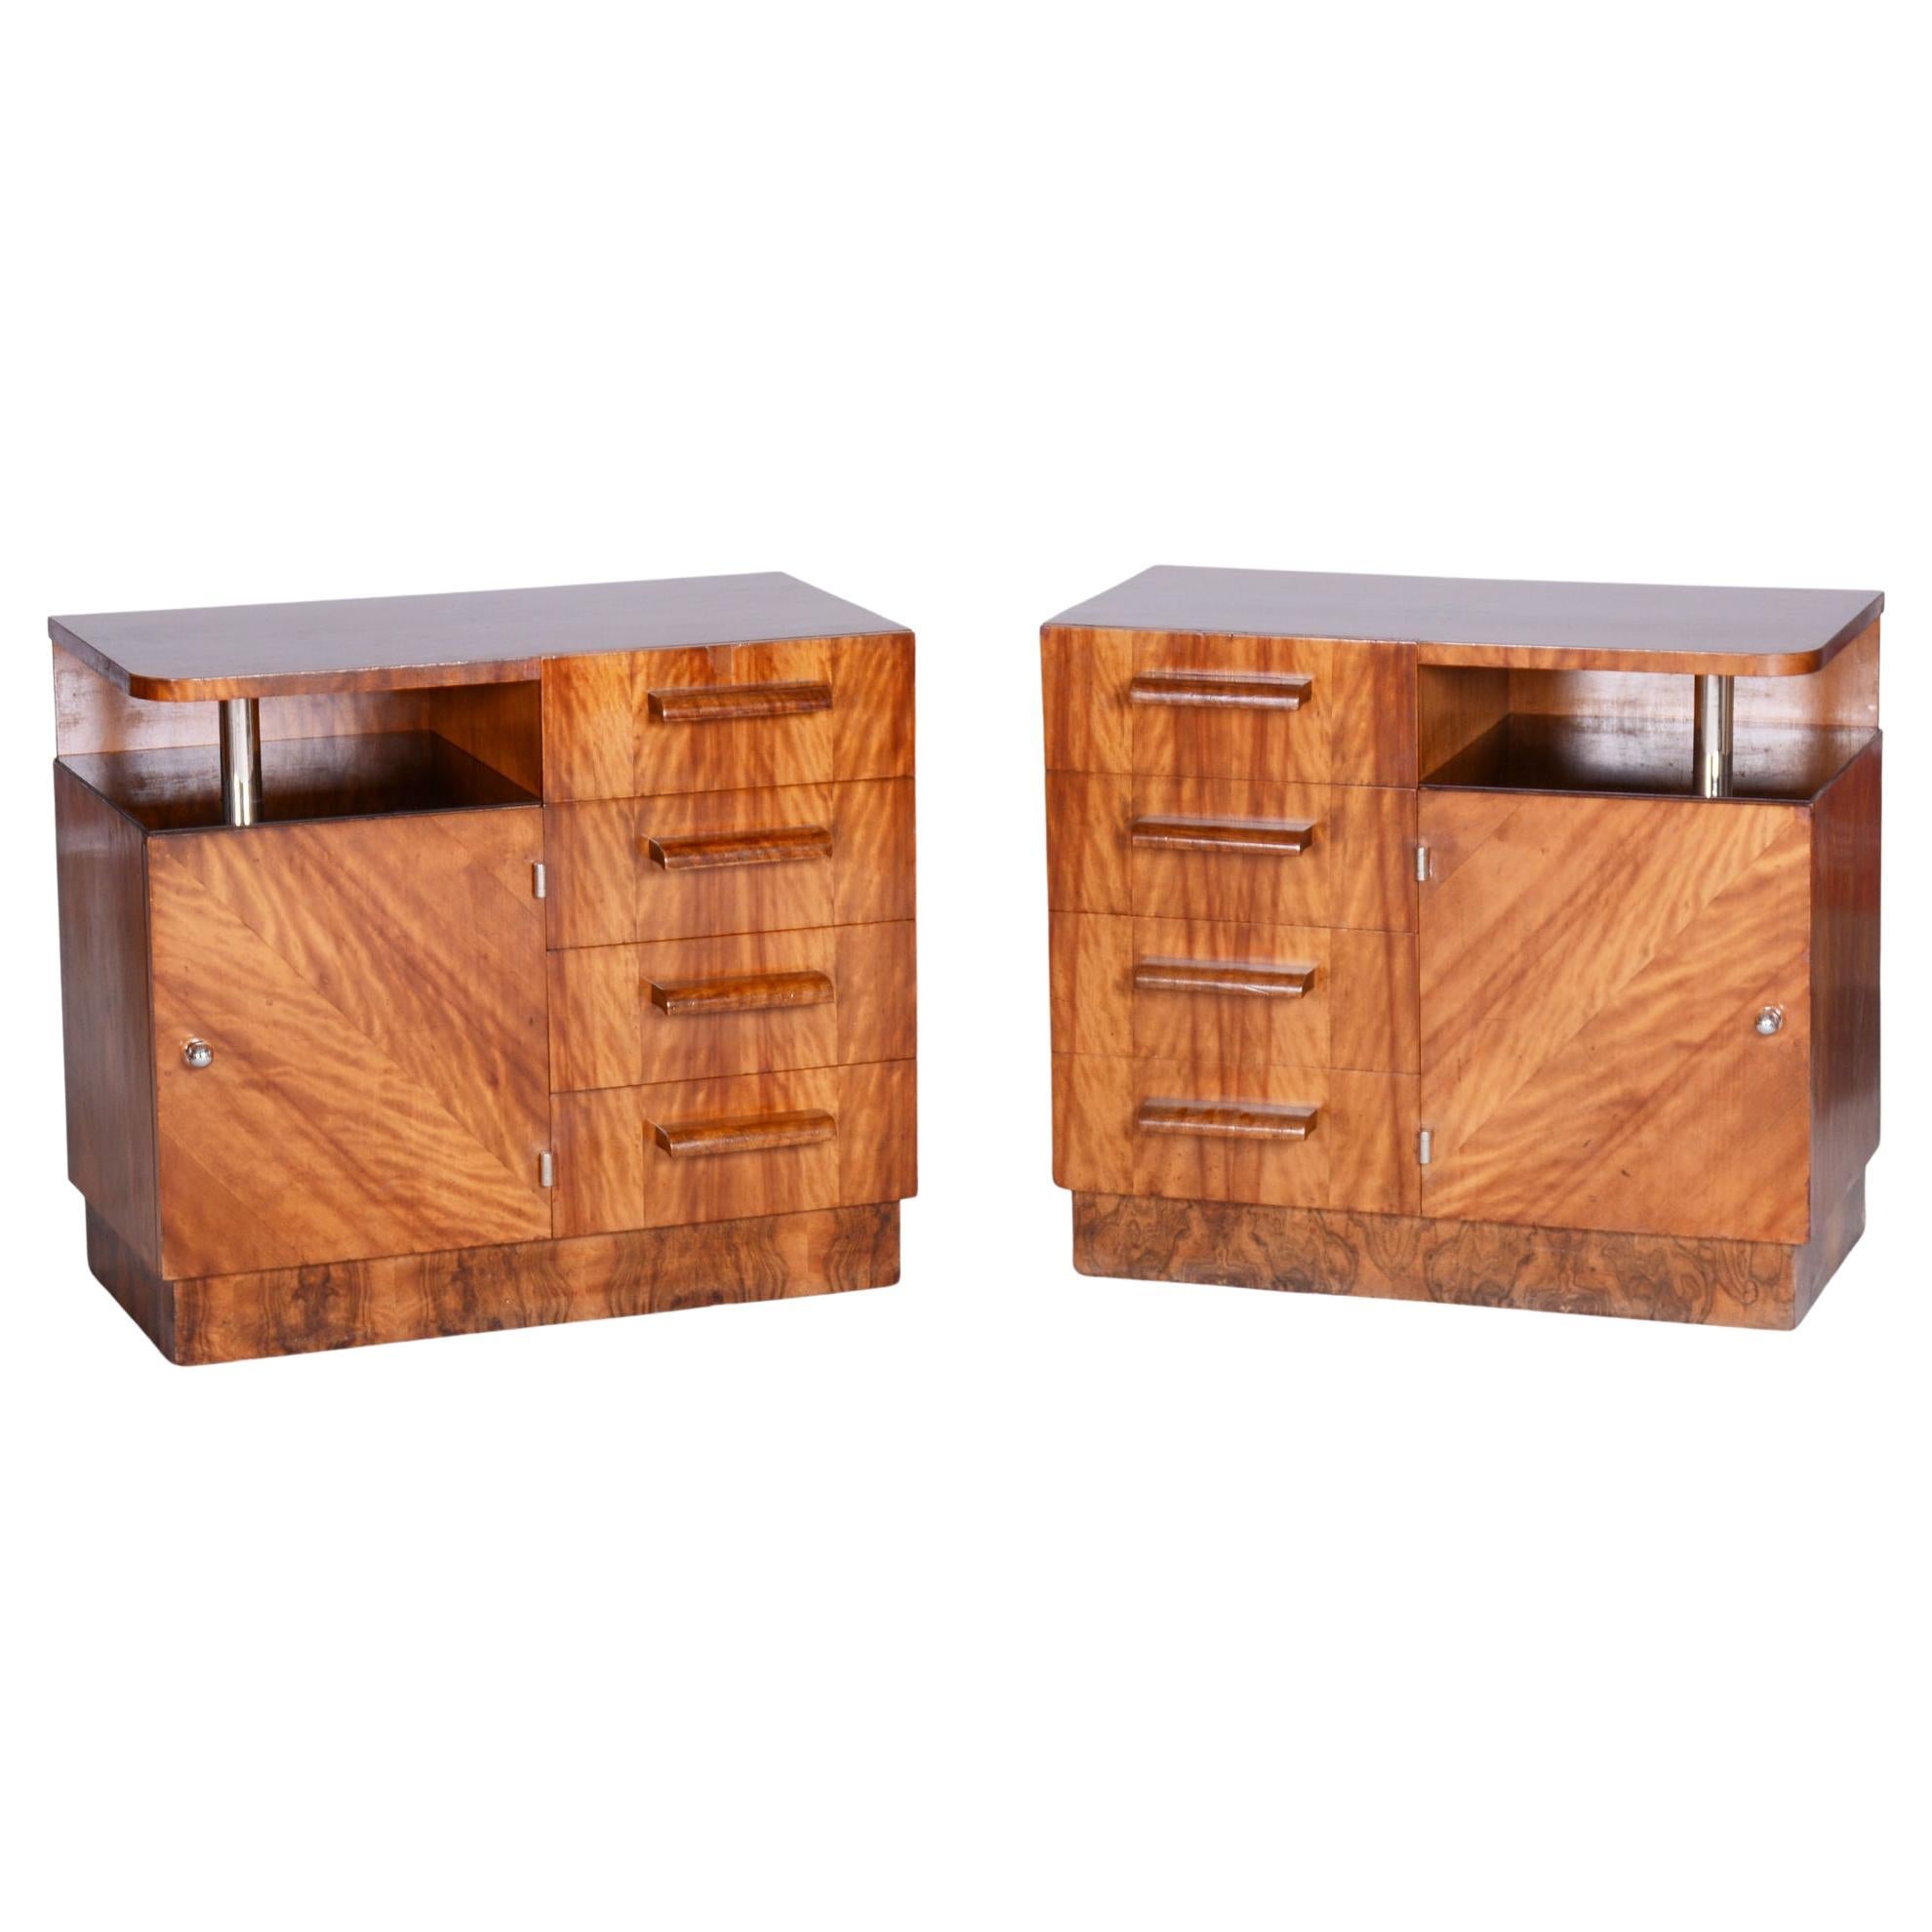 Restored ArtDeco Pair of Chests of Drawers, Palisandr, France, 1930s For Sale